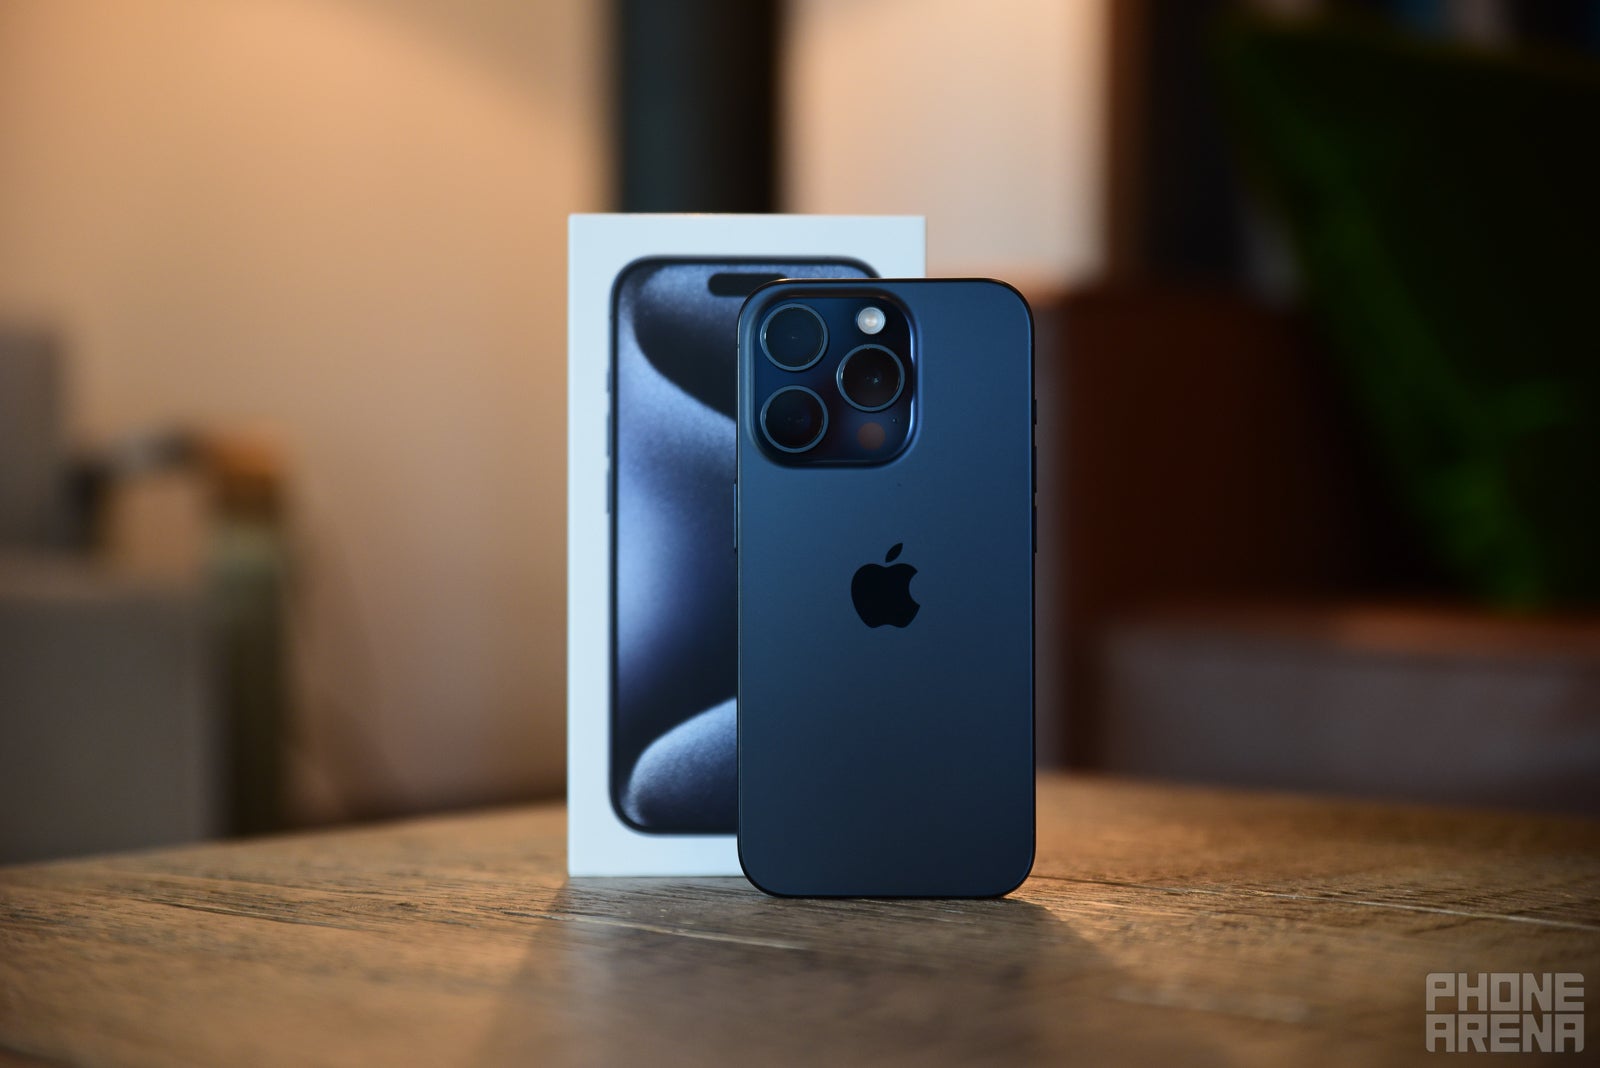 The iPhone 15 Pro in Blue Titanium (Image Credit - PhoneArena) - iPhone 15 colors: finding yours across 15, Pro, and Pro Max